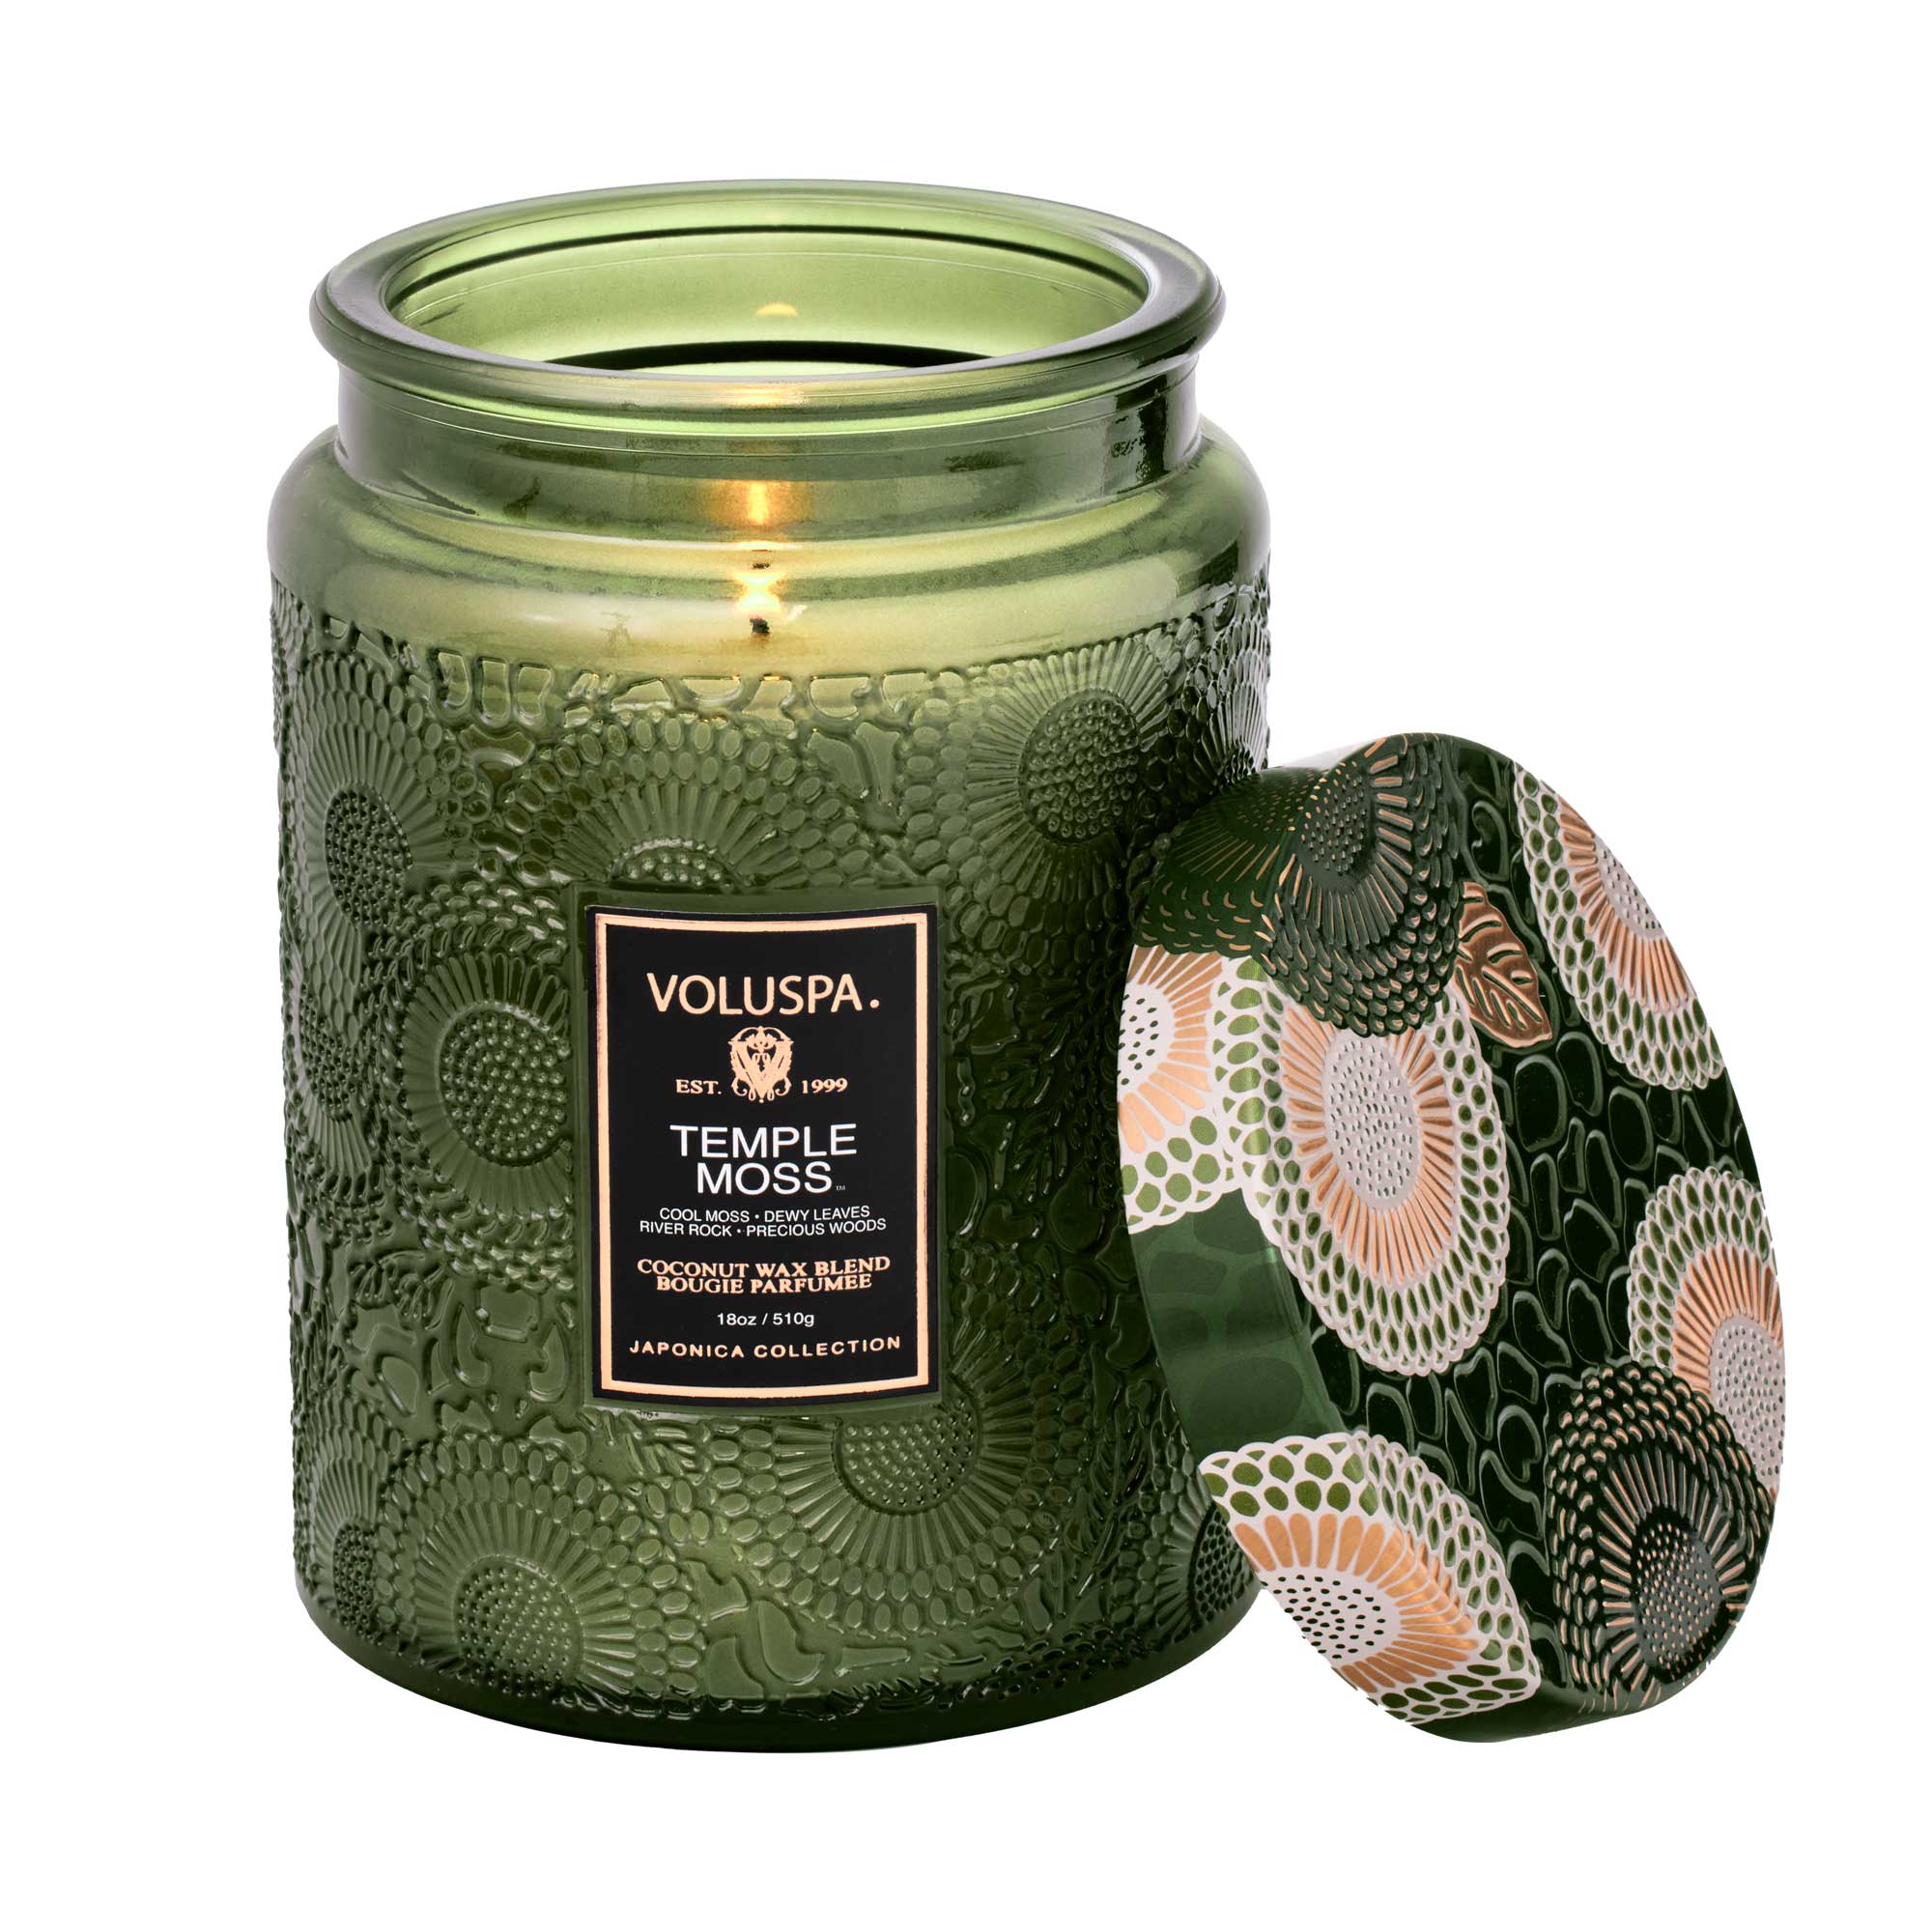 Temple Moss - Large Jar Candle